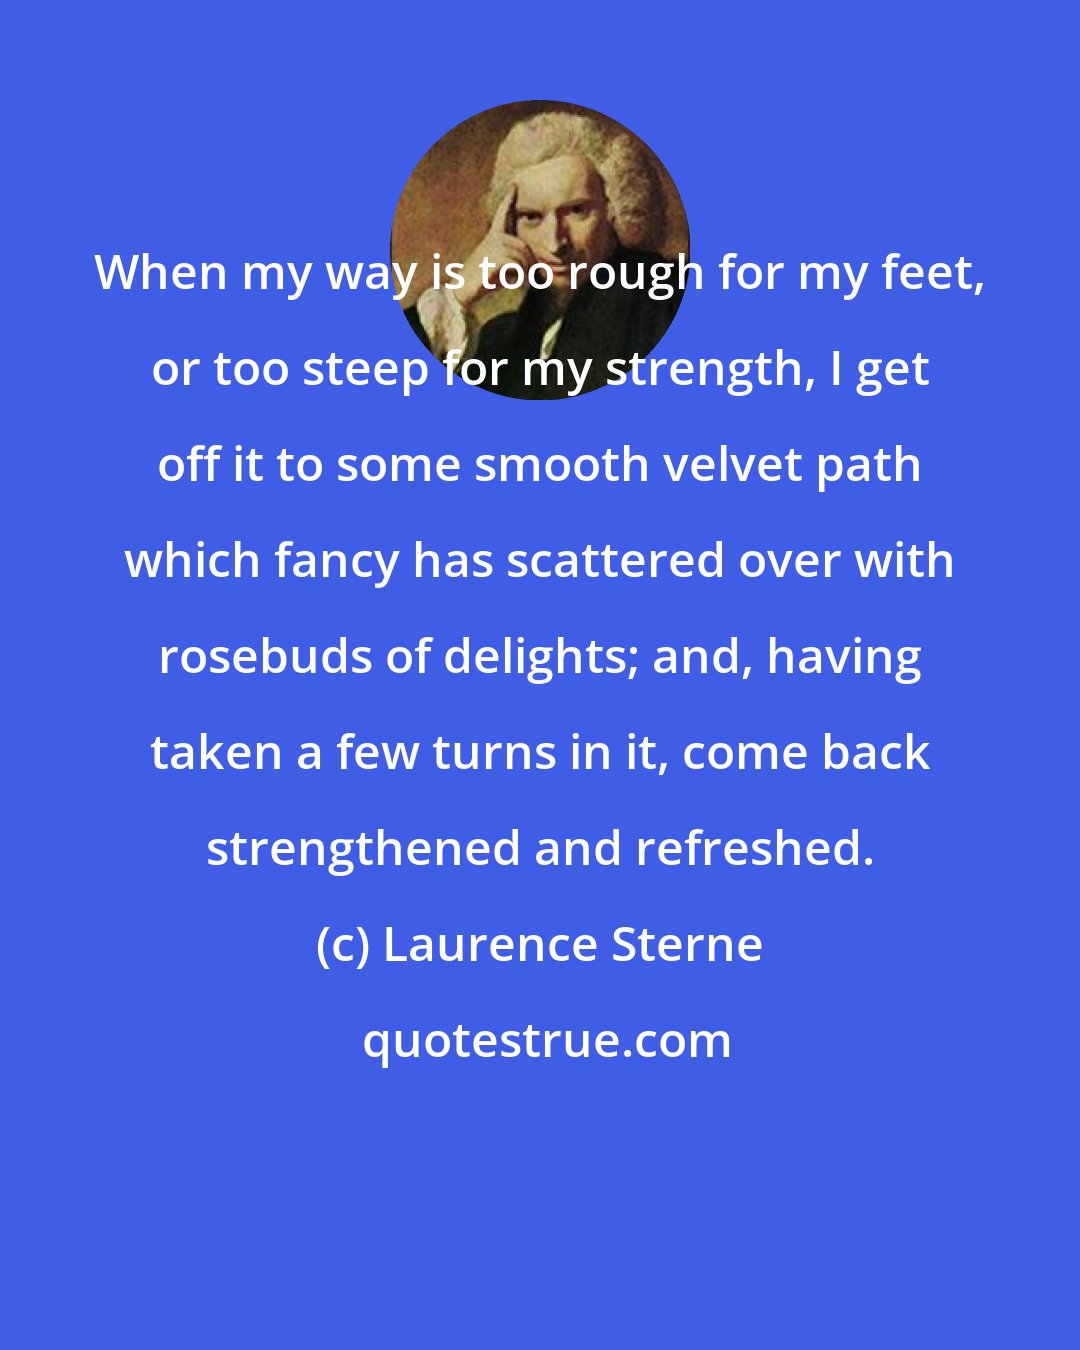 Laurence Sterne: When my way is too rough for my feet, or too steep for my strength, I get off it to some smooth velvet path which fancy has scattered over with rosebuds of delights; and, having taken a few turns in it, come back strengthened and refreshed.